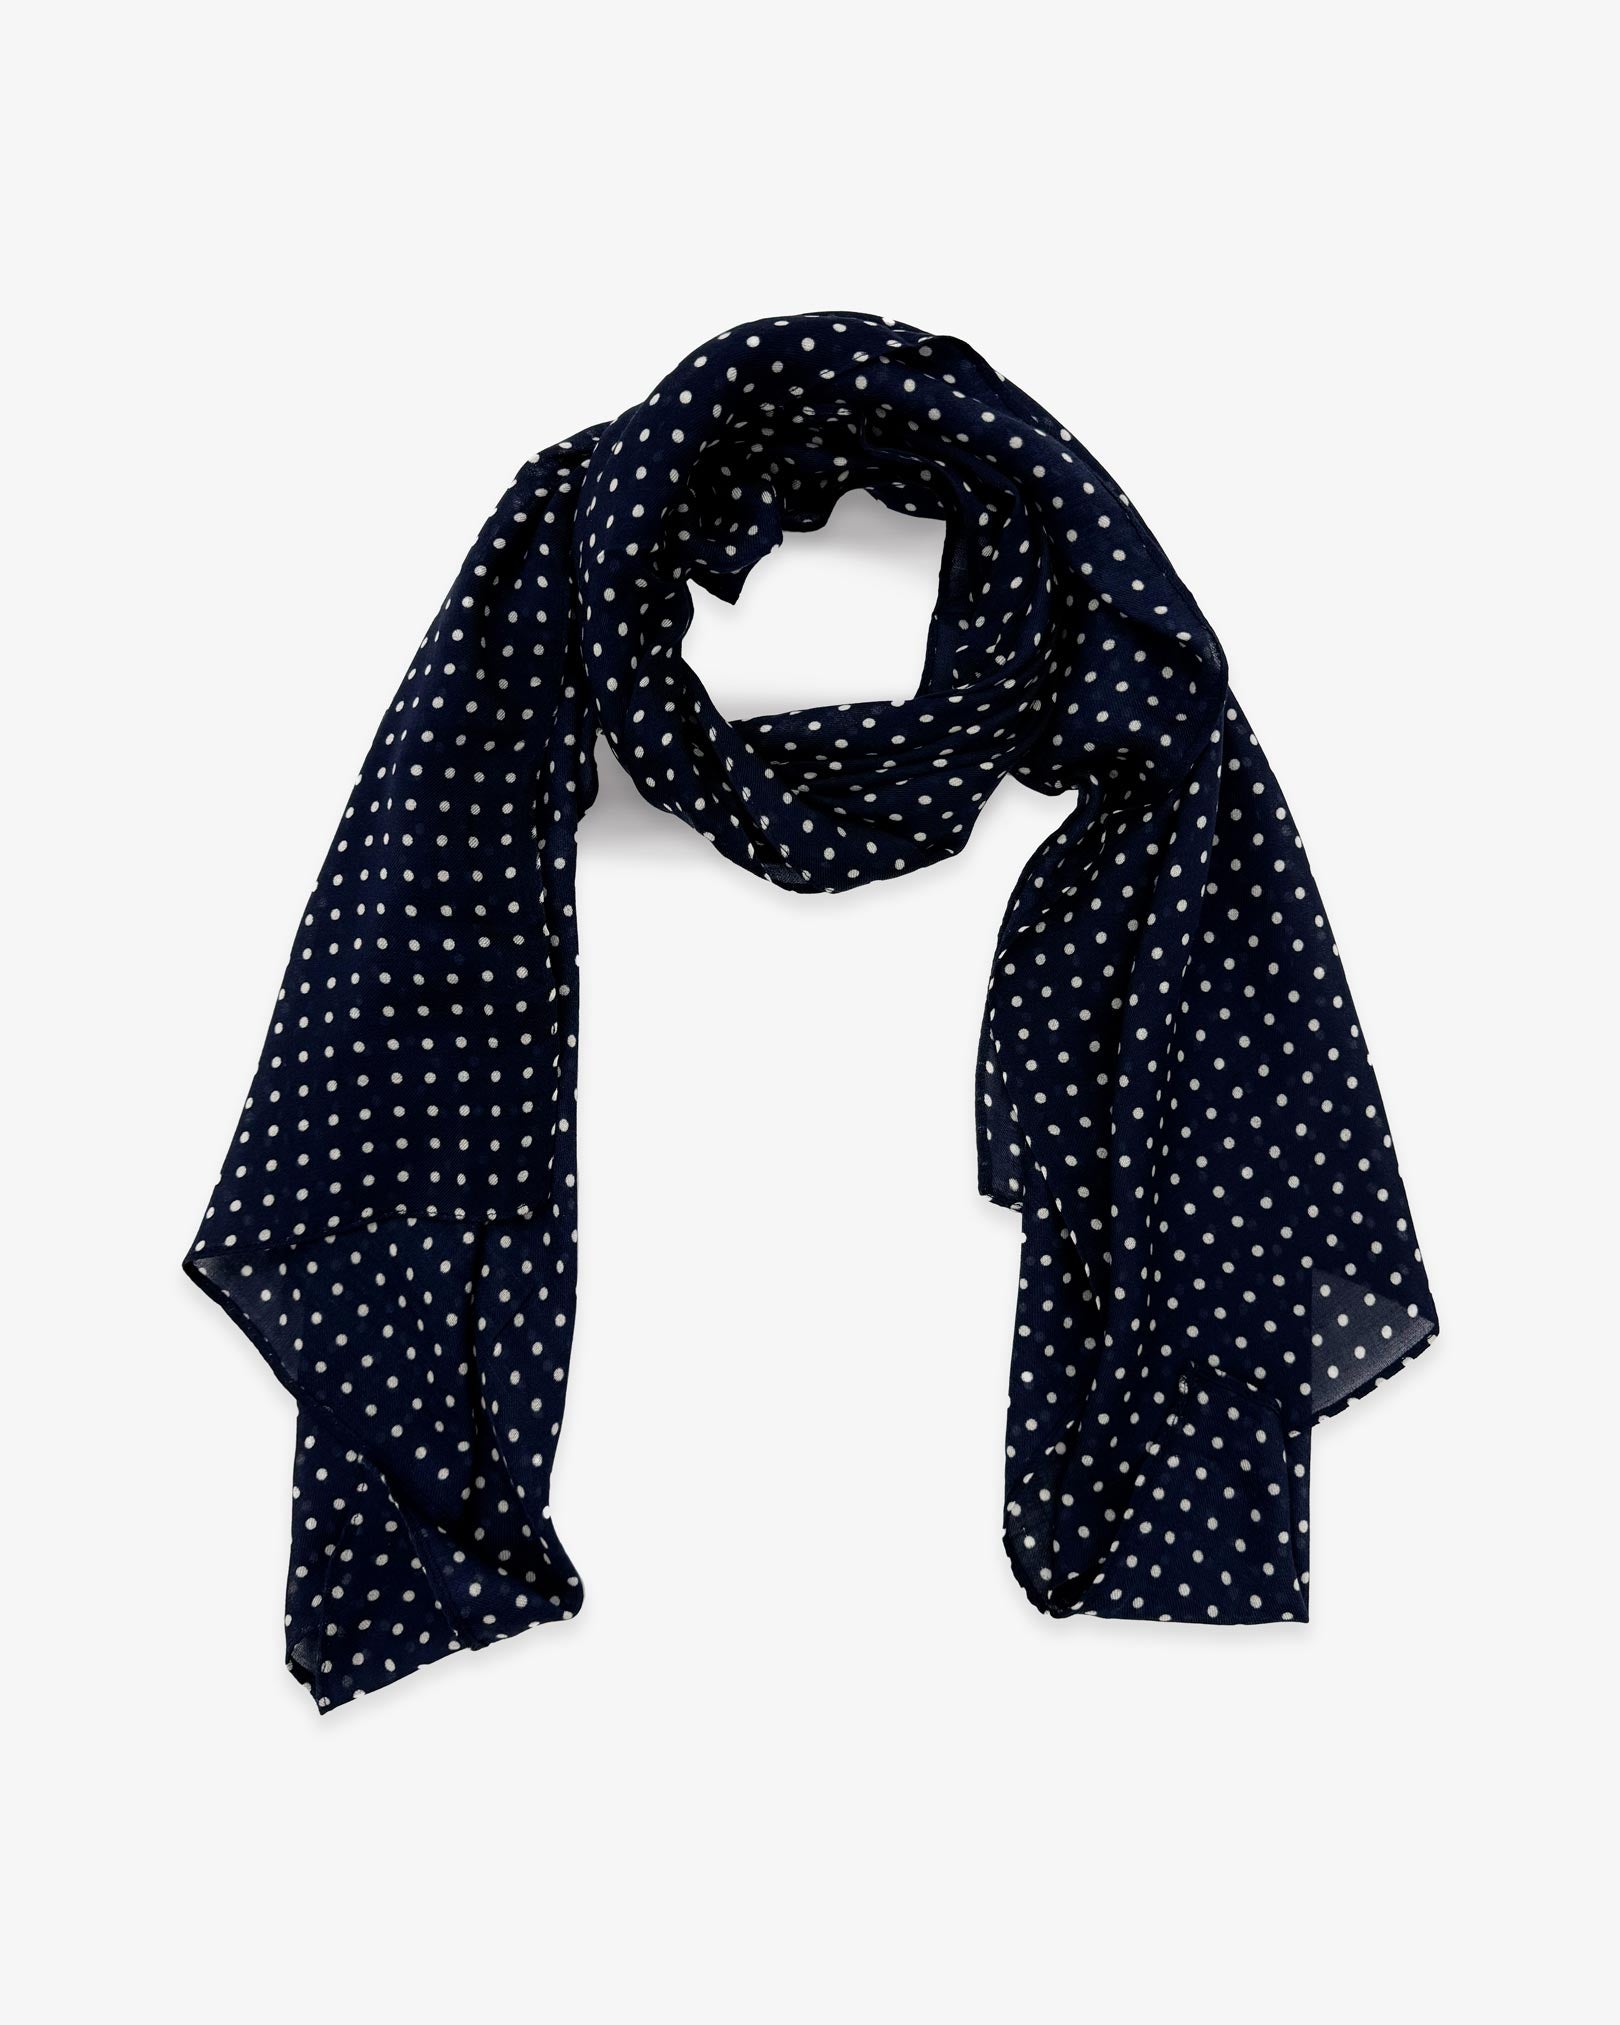 The Westminster wide scarf unravelled and looped in the middle, demonstrating the longer scarf length and polka dot patterns.